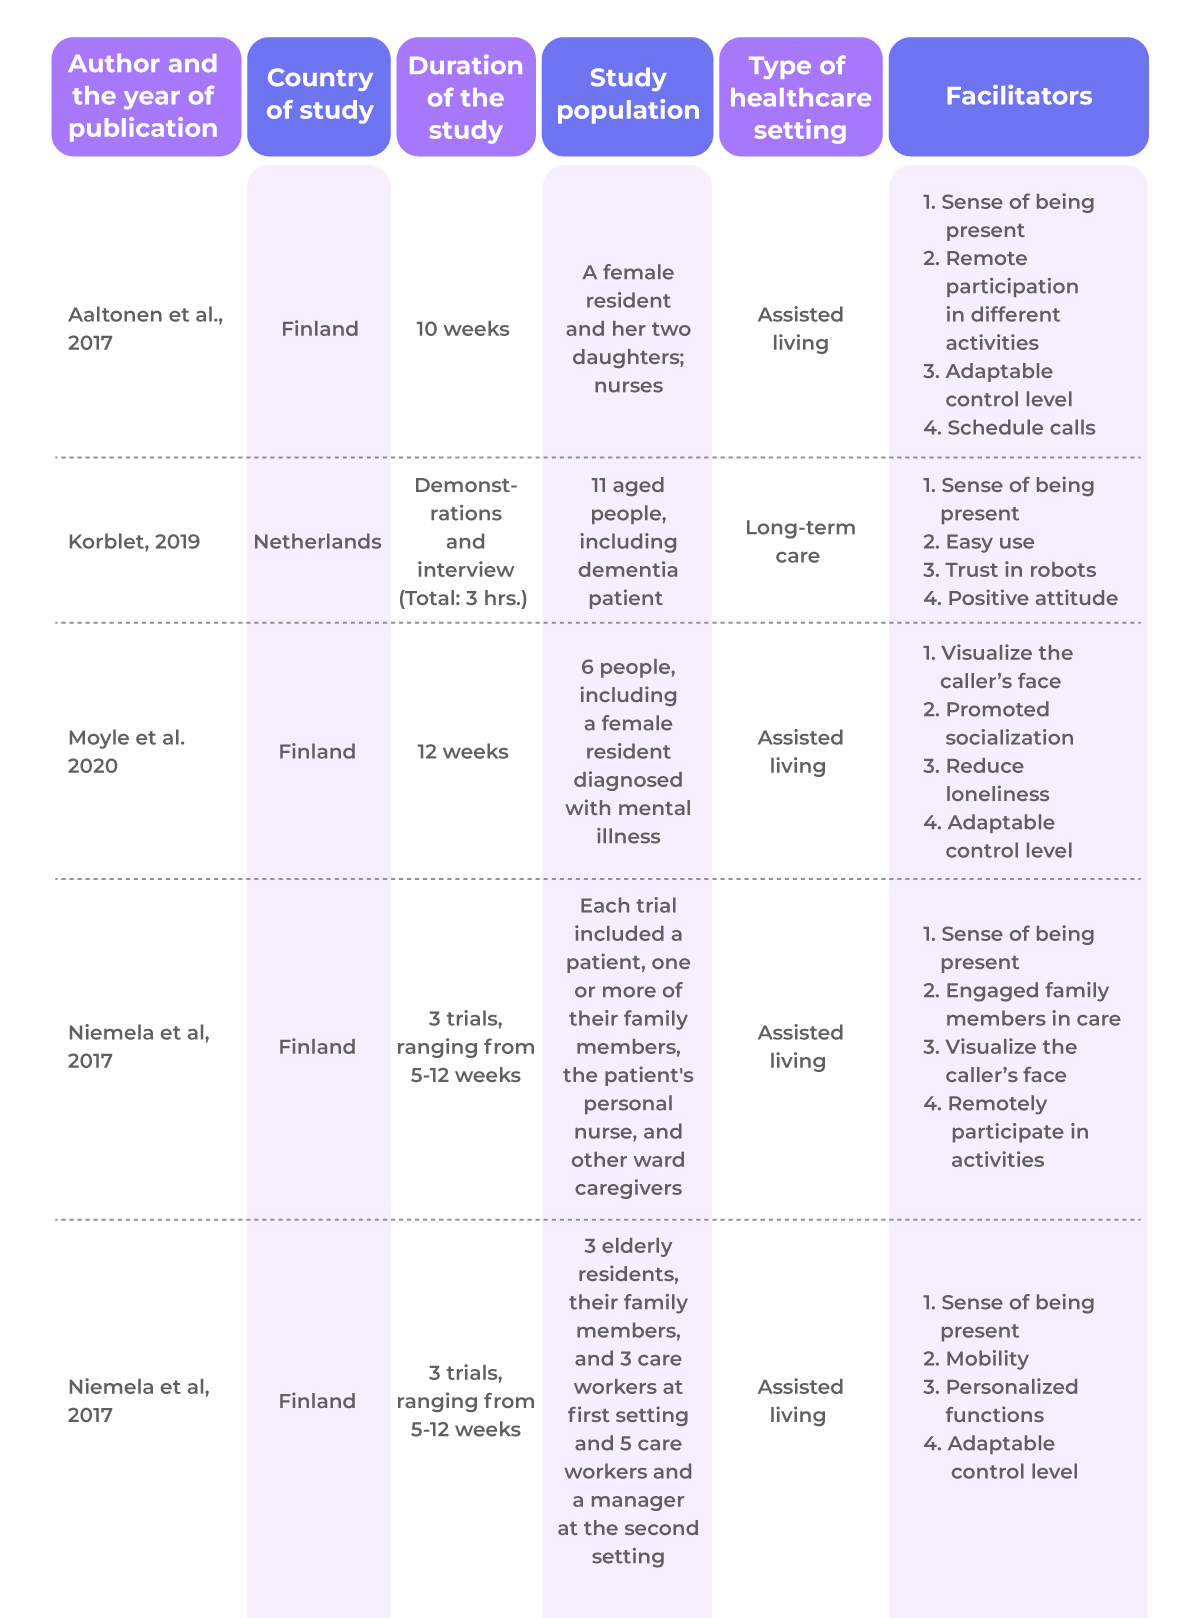 Table of evidence based studies